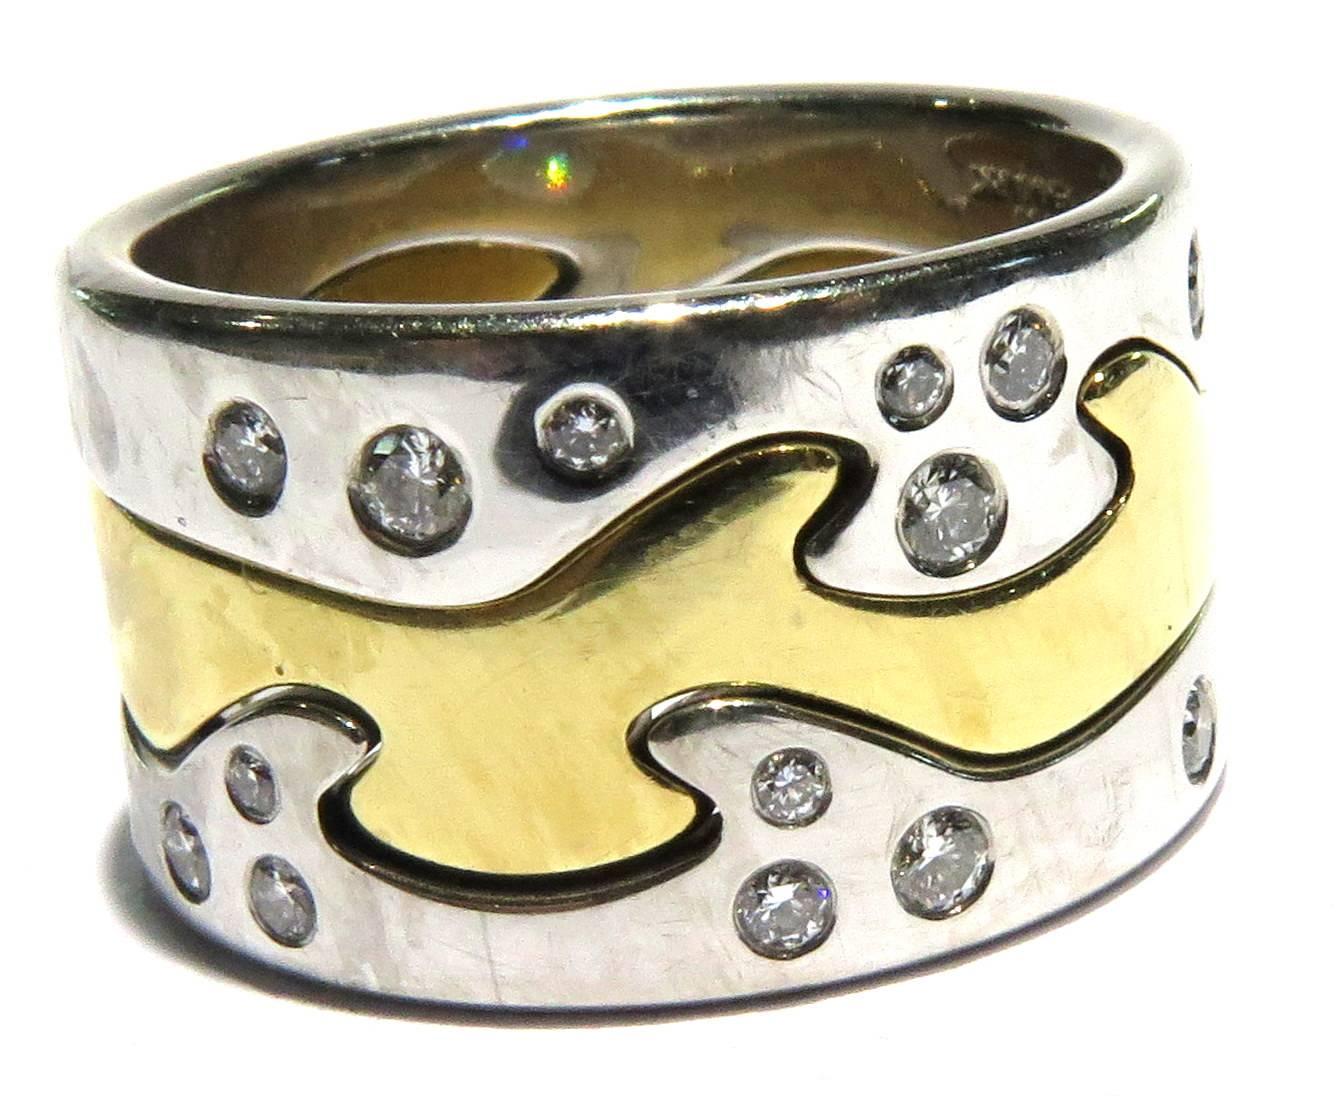 This Fusion ring by Nina Koppel for Georg Jensen can be worn by men or women. This puzzle type ring can be worn with 1, 2, or all 3 pieces. There are 2 18k white gold with scattered diamonds bands and 1 18k yellow gold band in the center. This bold